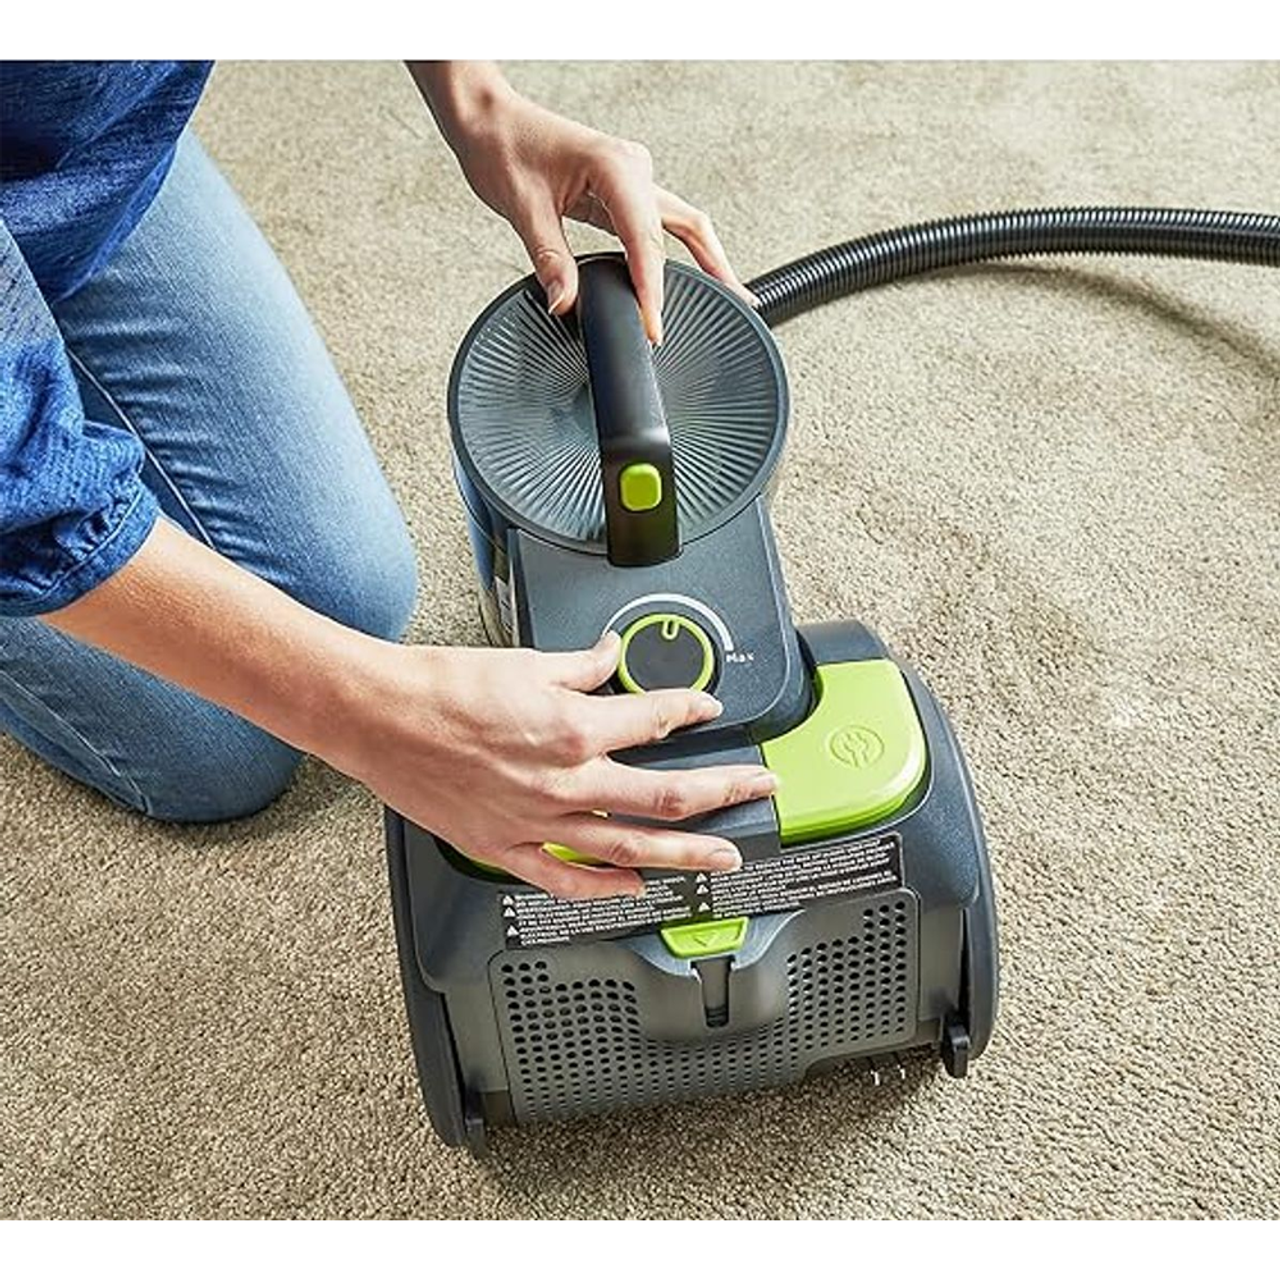 BLACK+DECKER® Bagless Multi-Cyclonic Canister Vacuum, BDXCAV217G product image